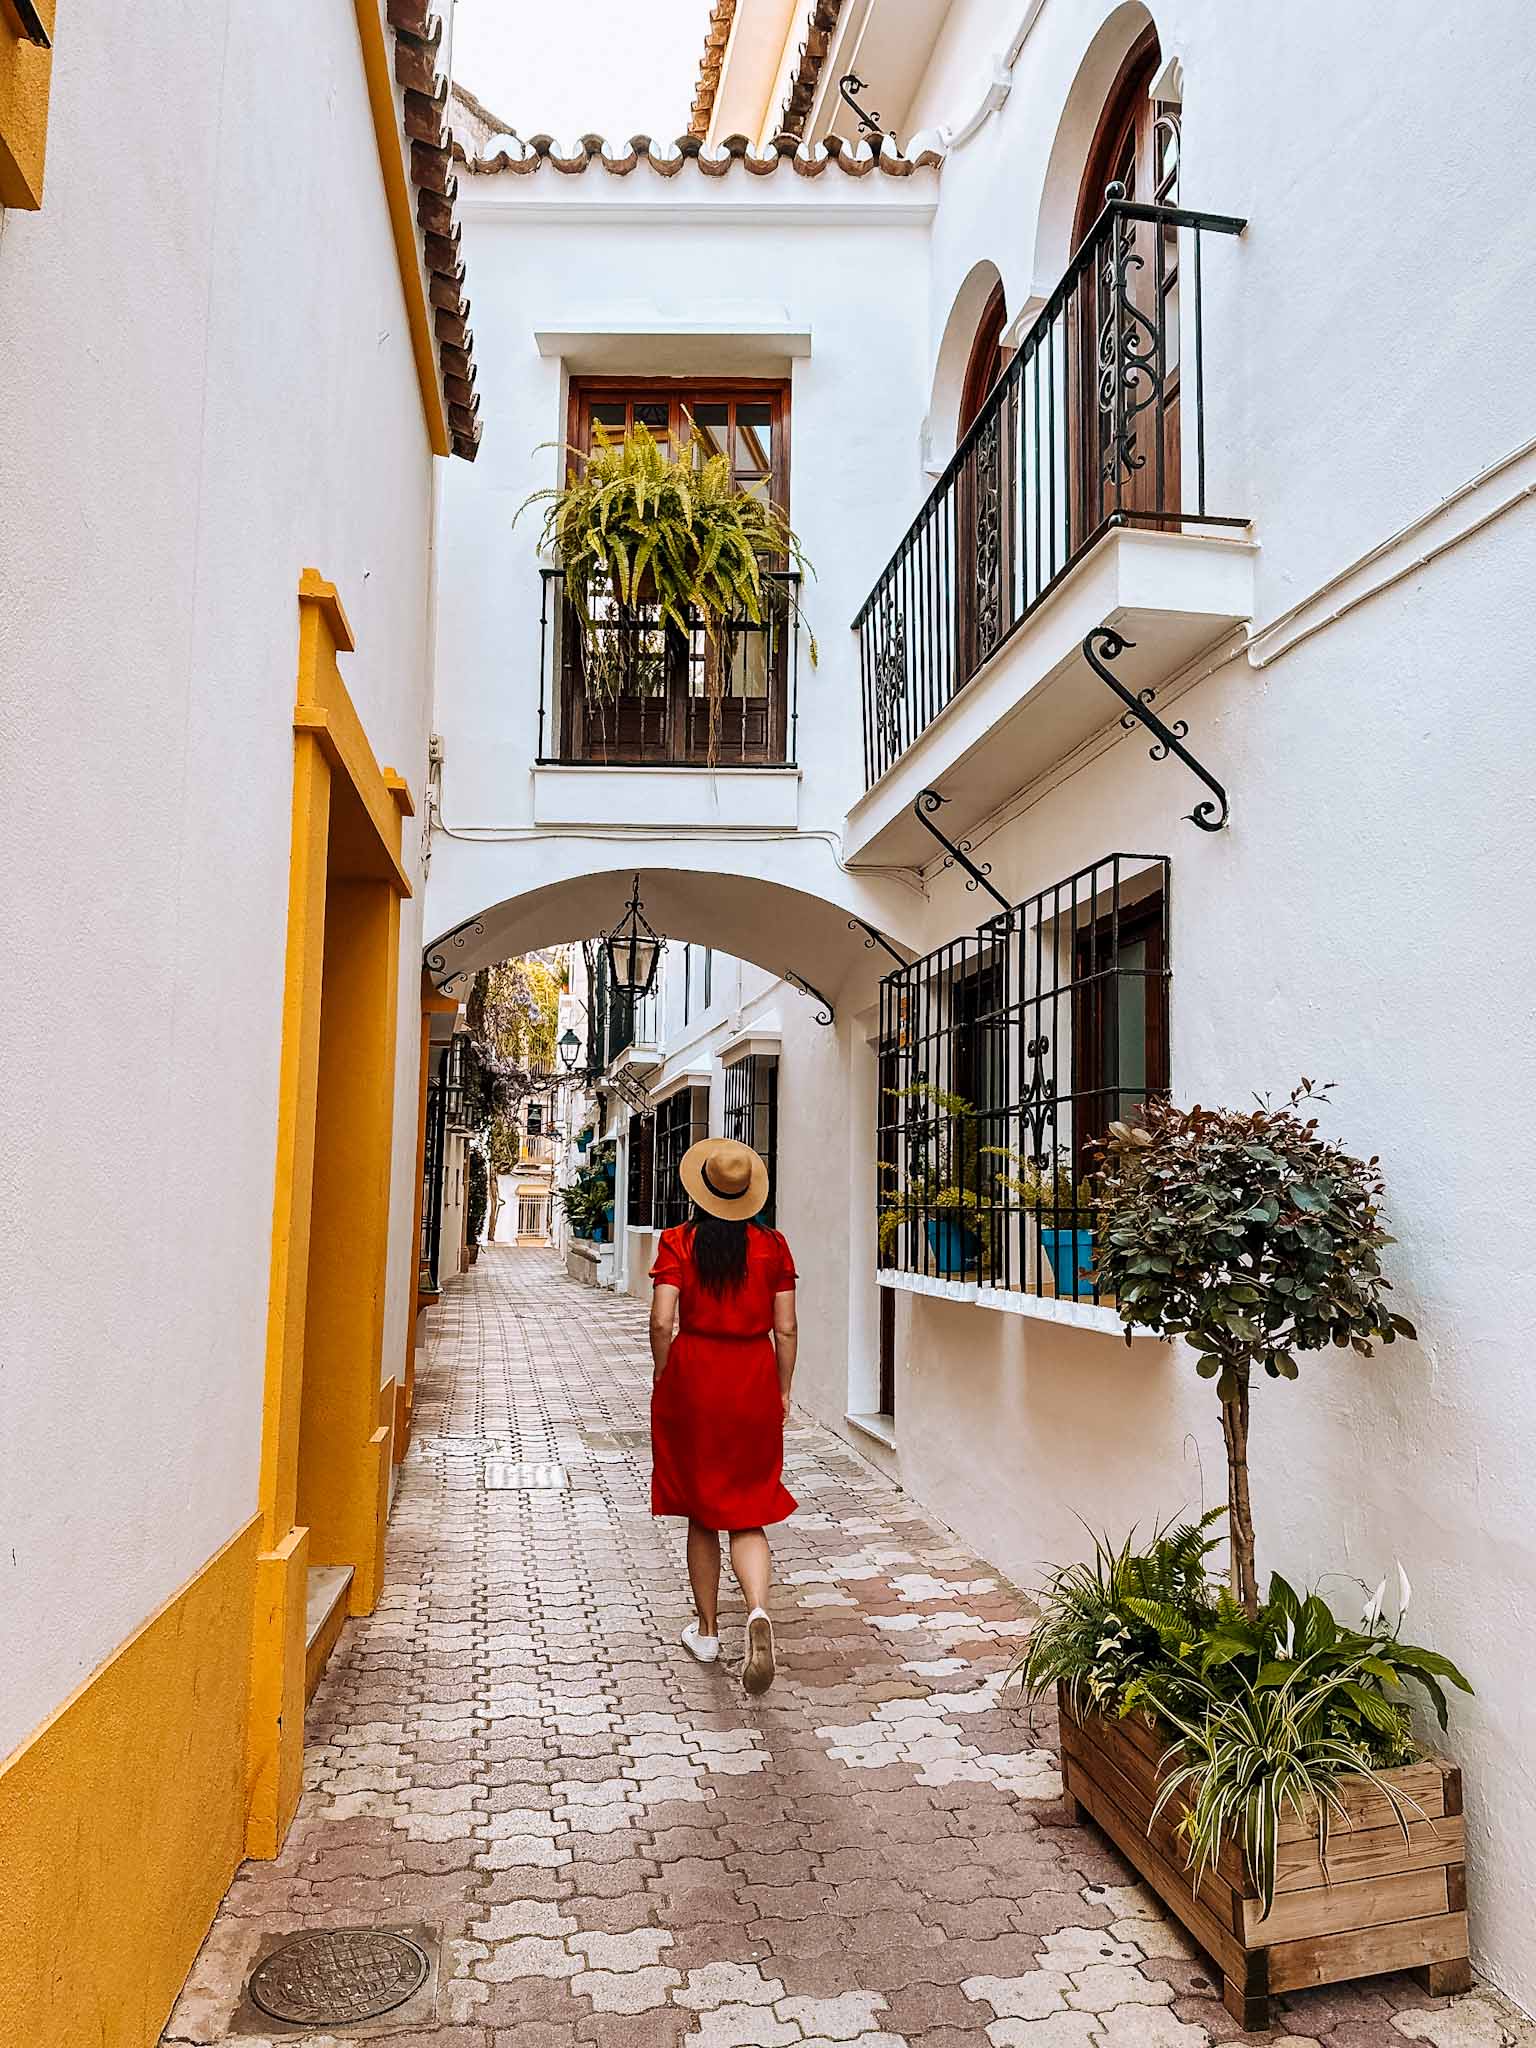 Most beautiful whitewashed villages and unique towns in Andalusia, Spain - Marbella Old Town